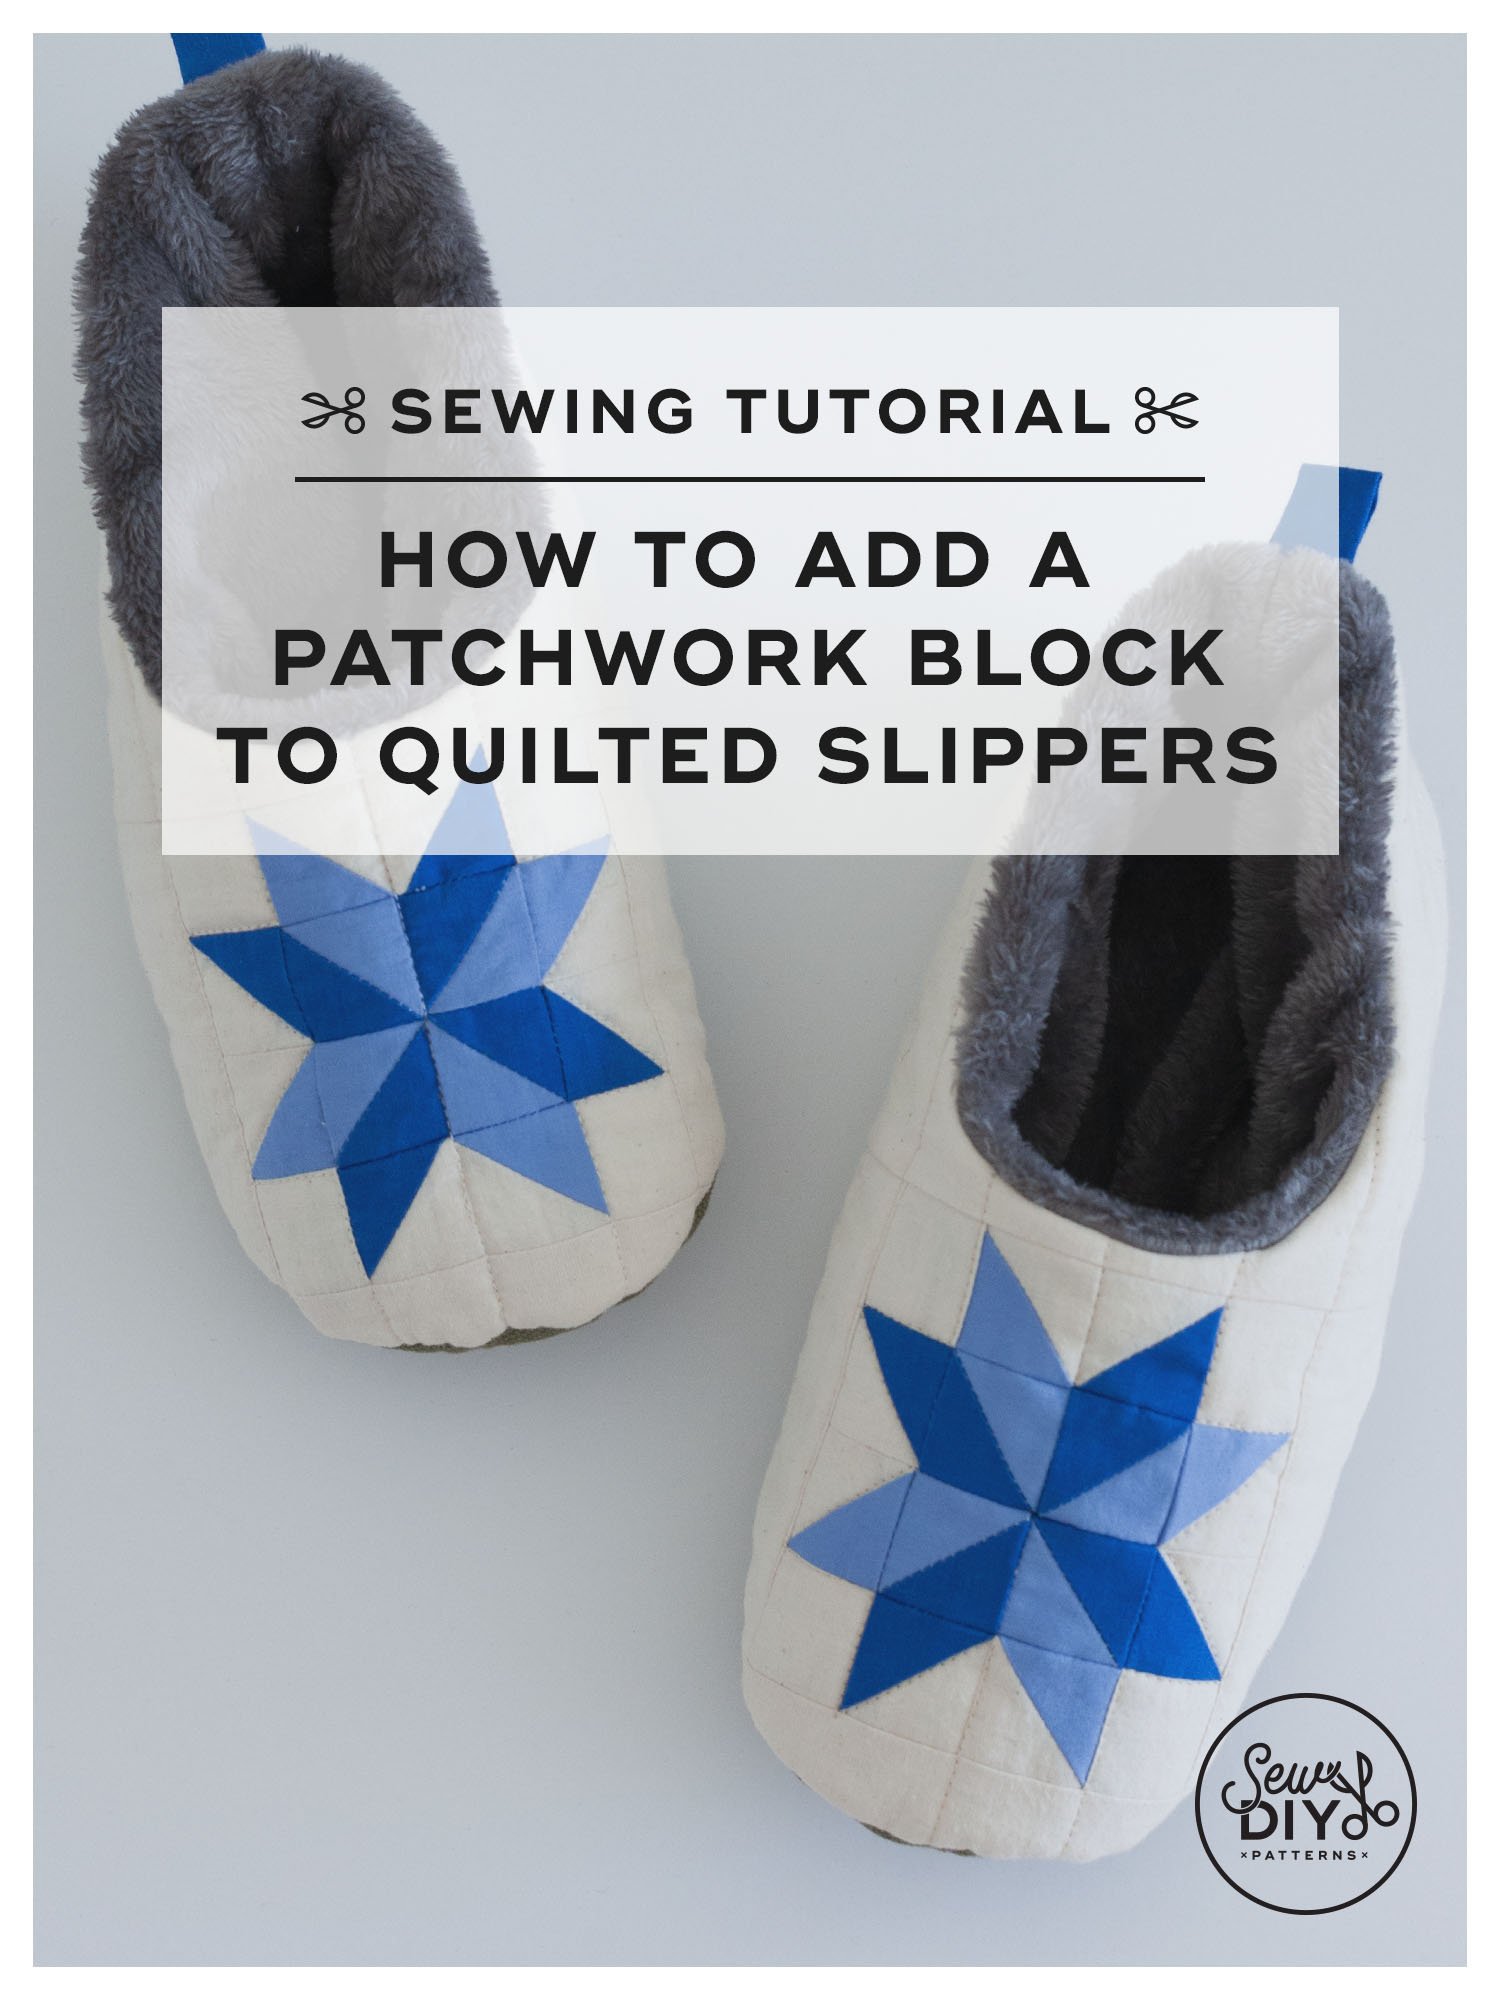 How to Add a Patchwork Block to the Quilted Slippers